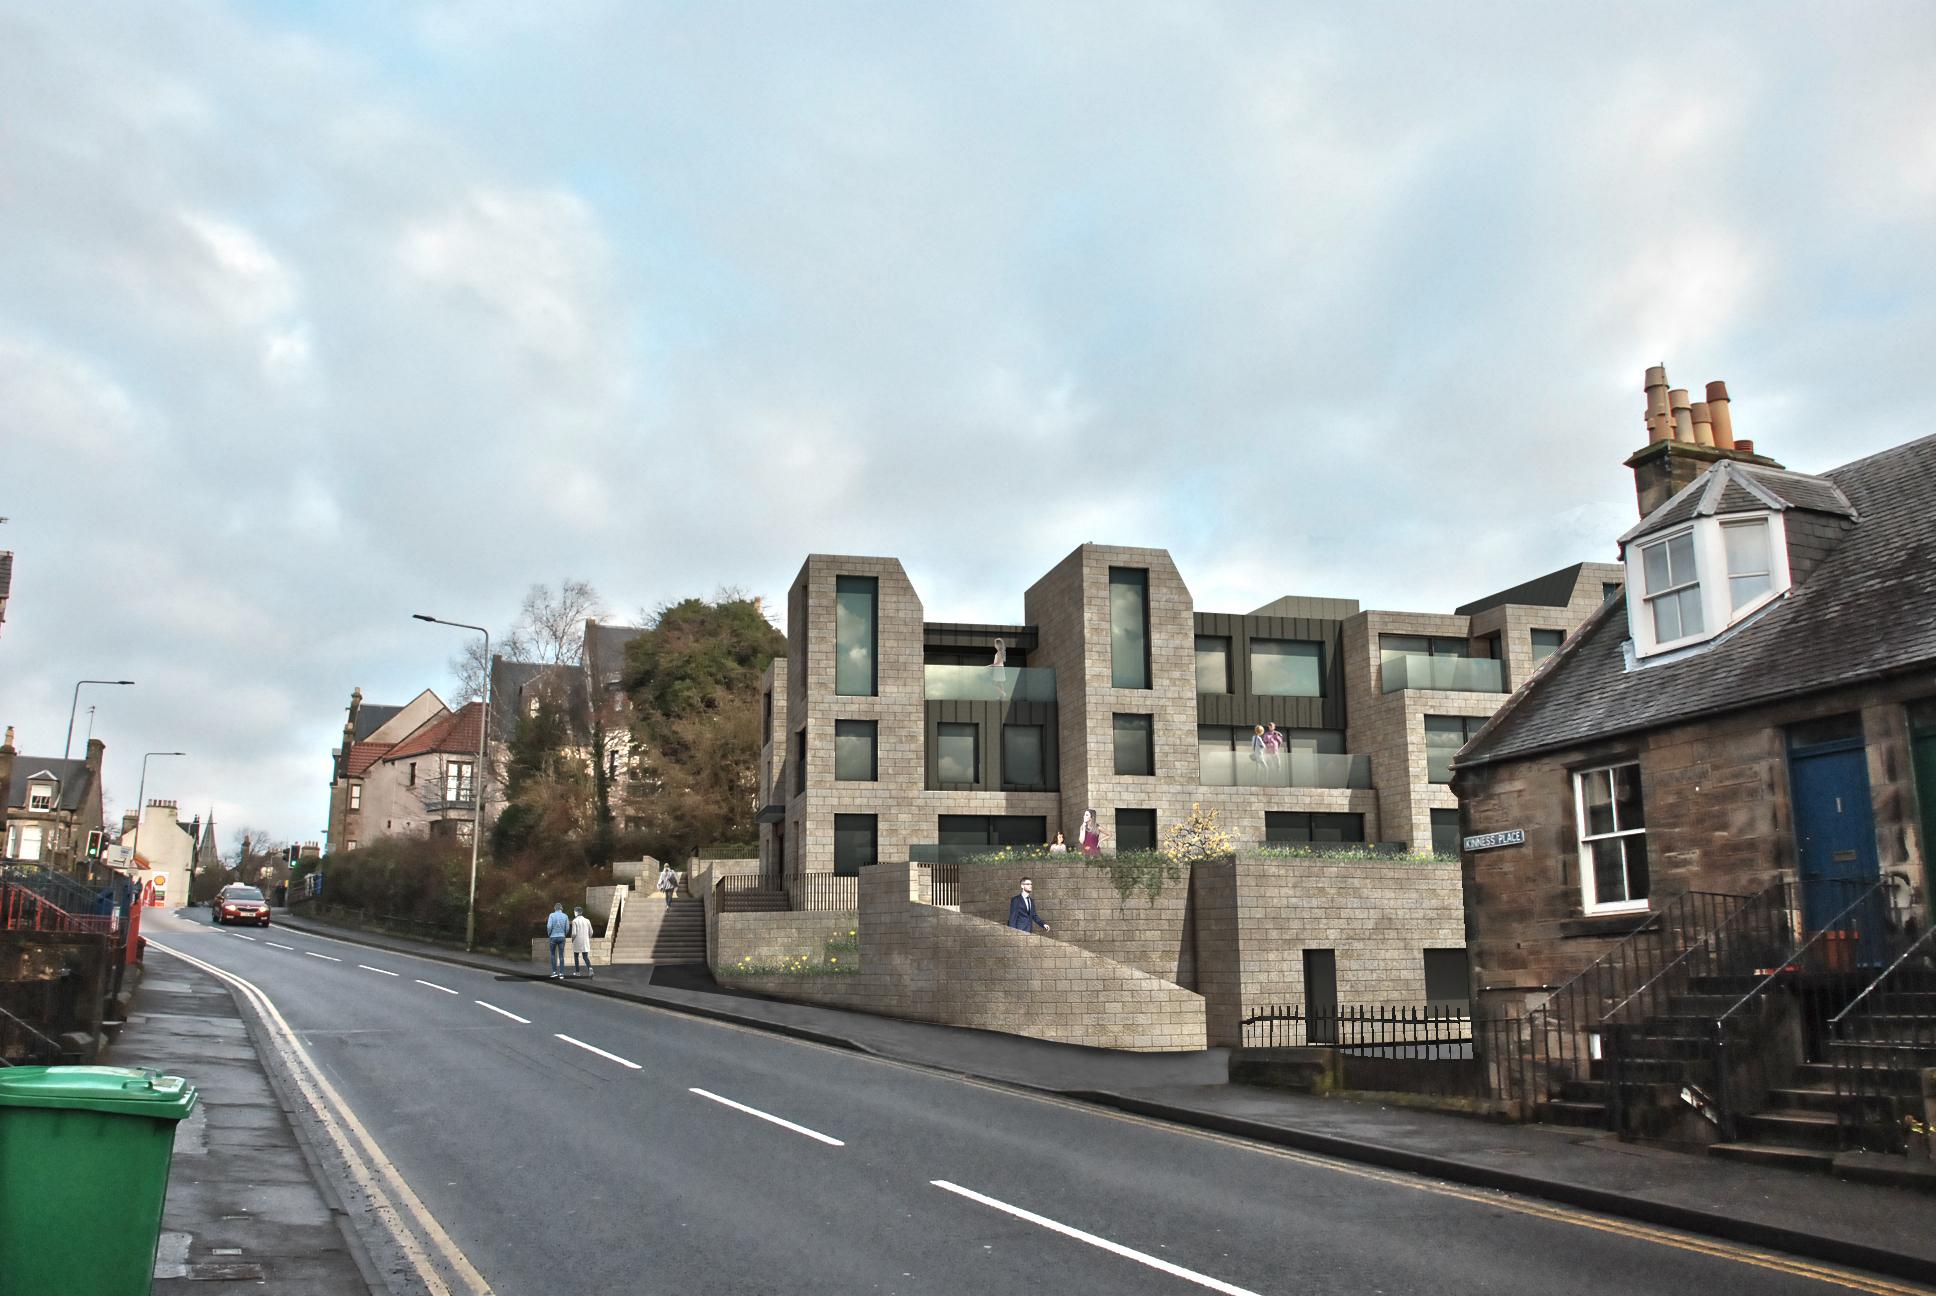 An artist's impression of how the development could look in St Andrews.